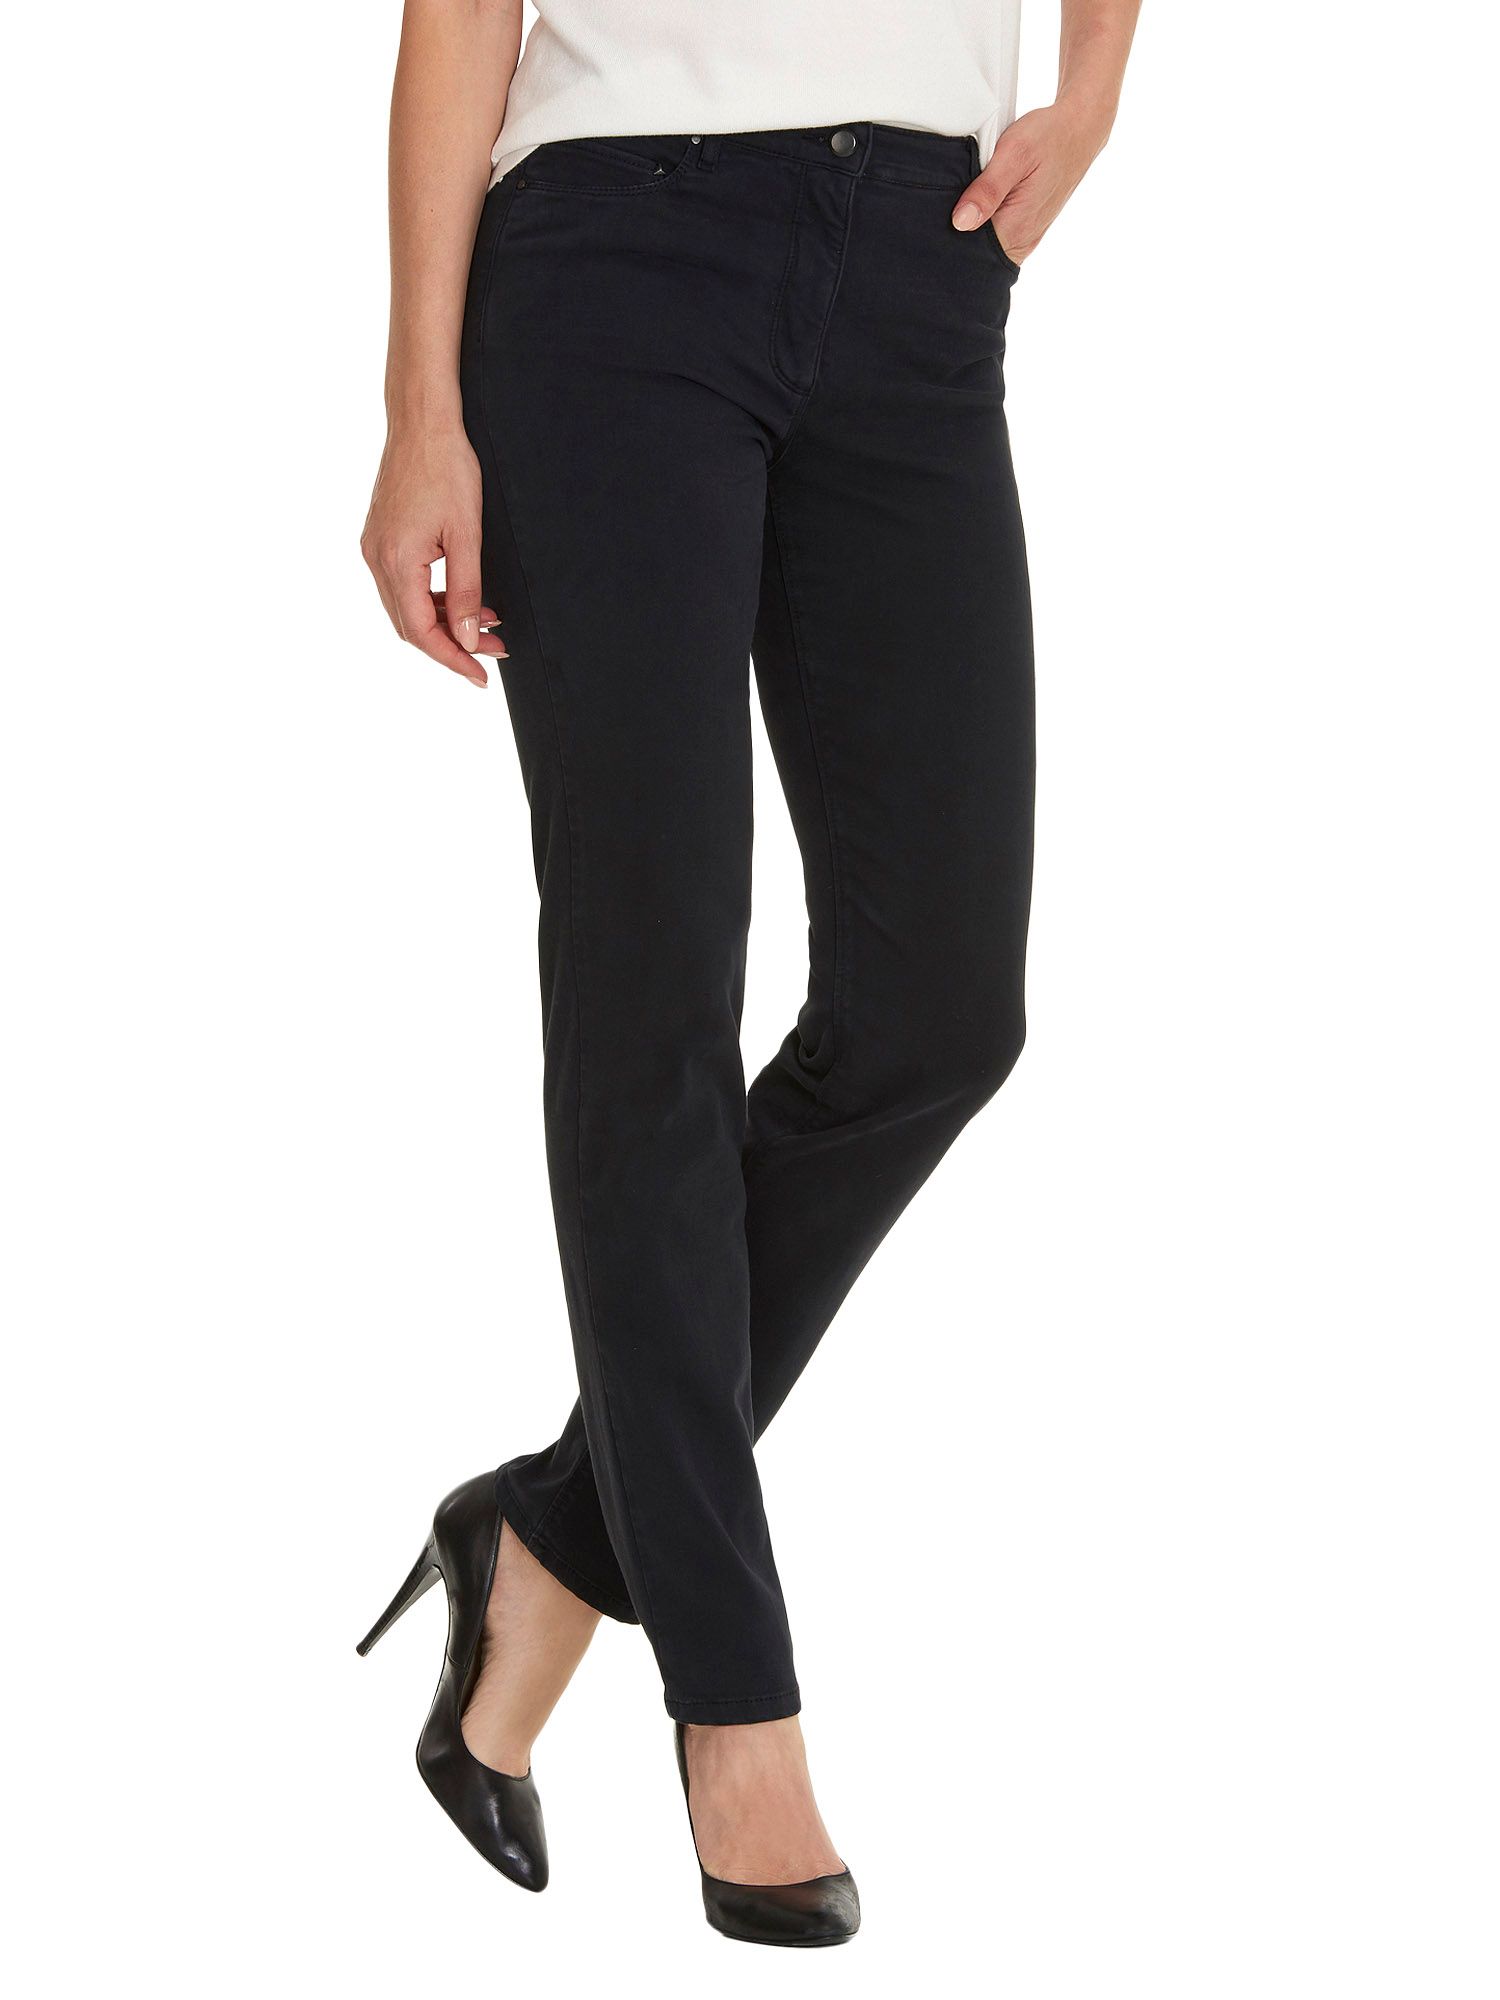 Betty Barclay Perfect Body Jeans, Black at John Lewis & Partners